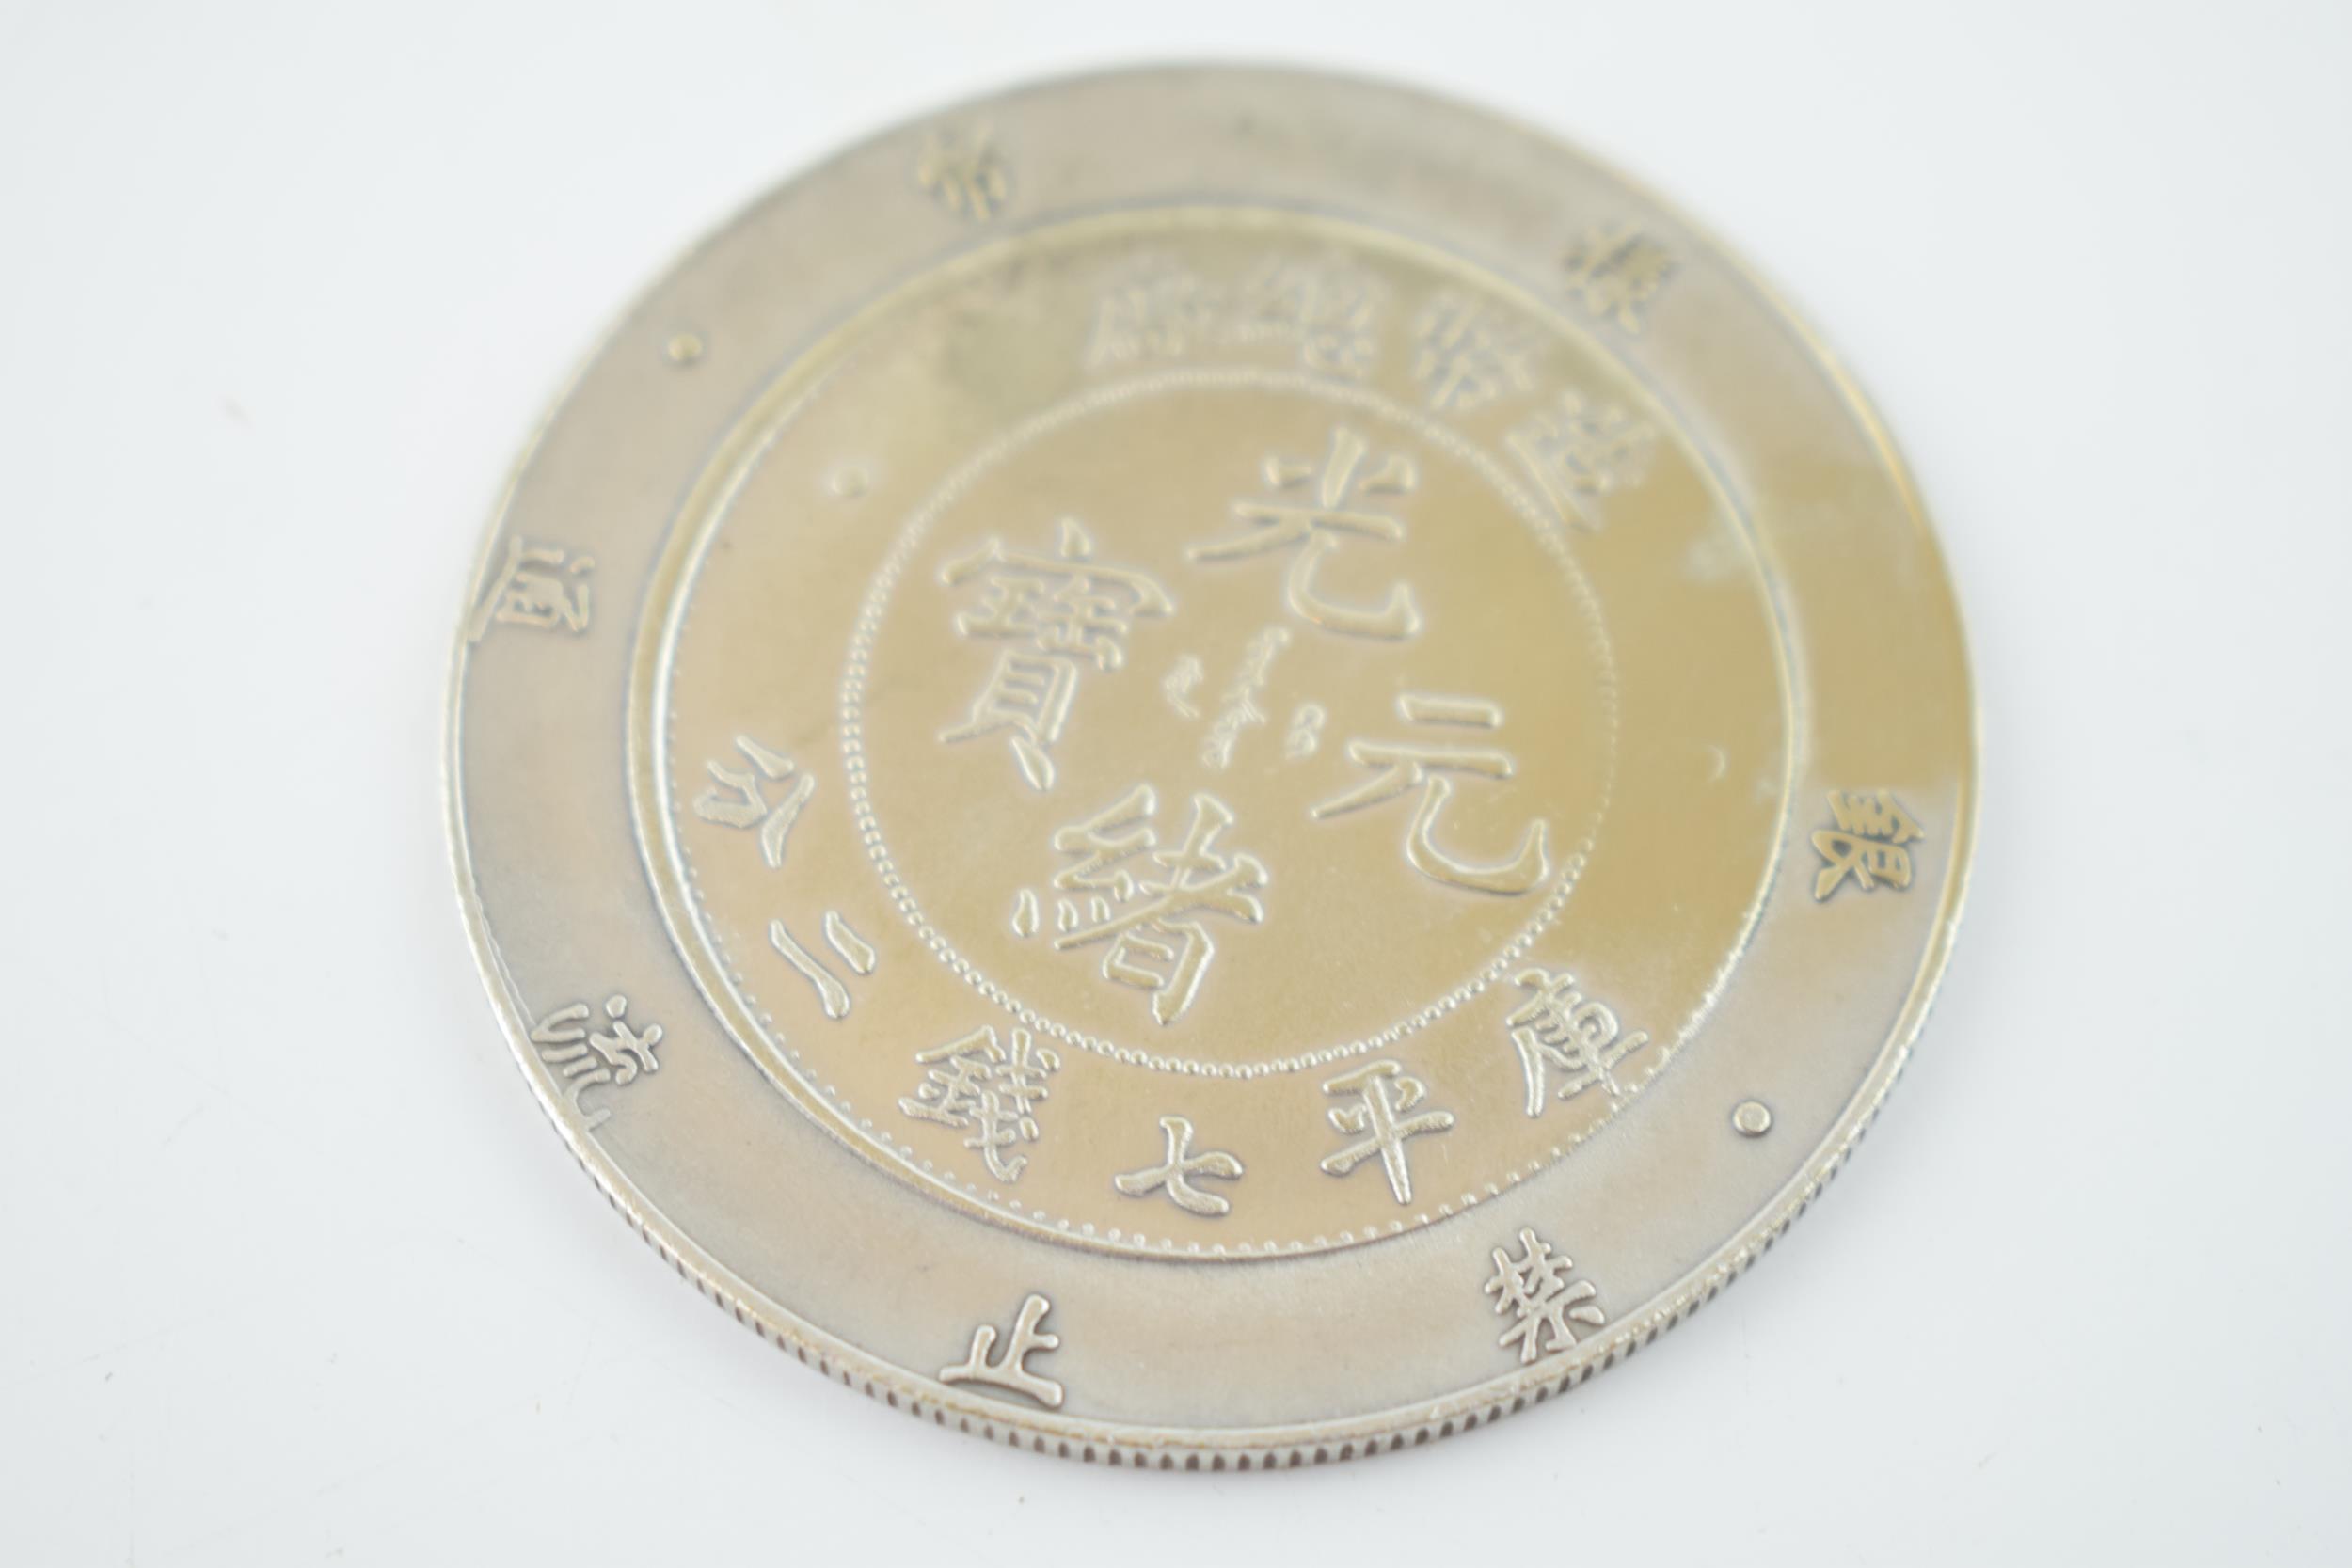 A Tai-Ching-Ti-Kuo Silver Coin. Diameter 50mm. Height 29.3 grams. With some signs of light wear. - Bild 2 aus 2